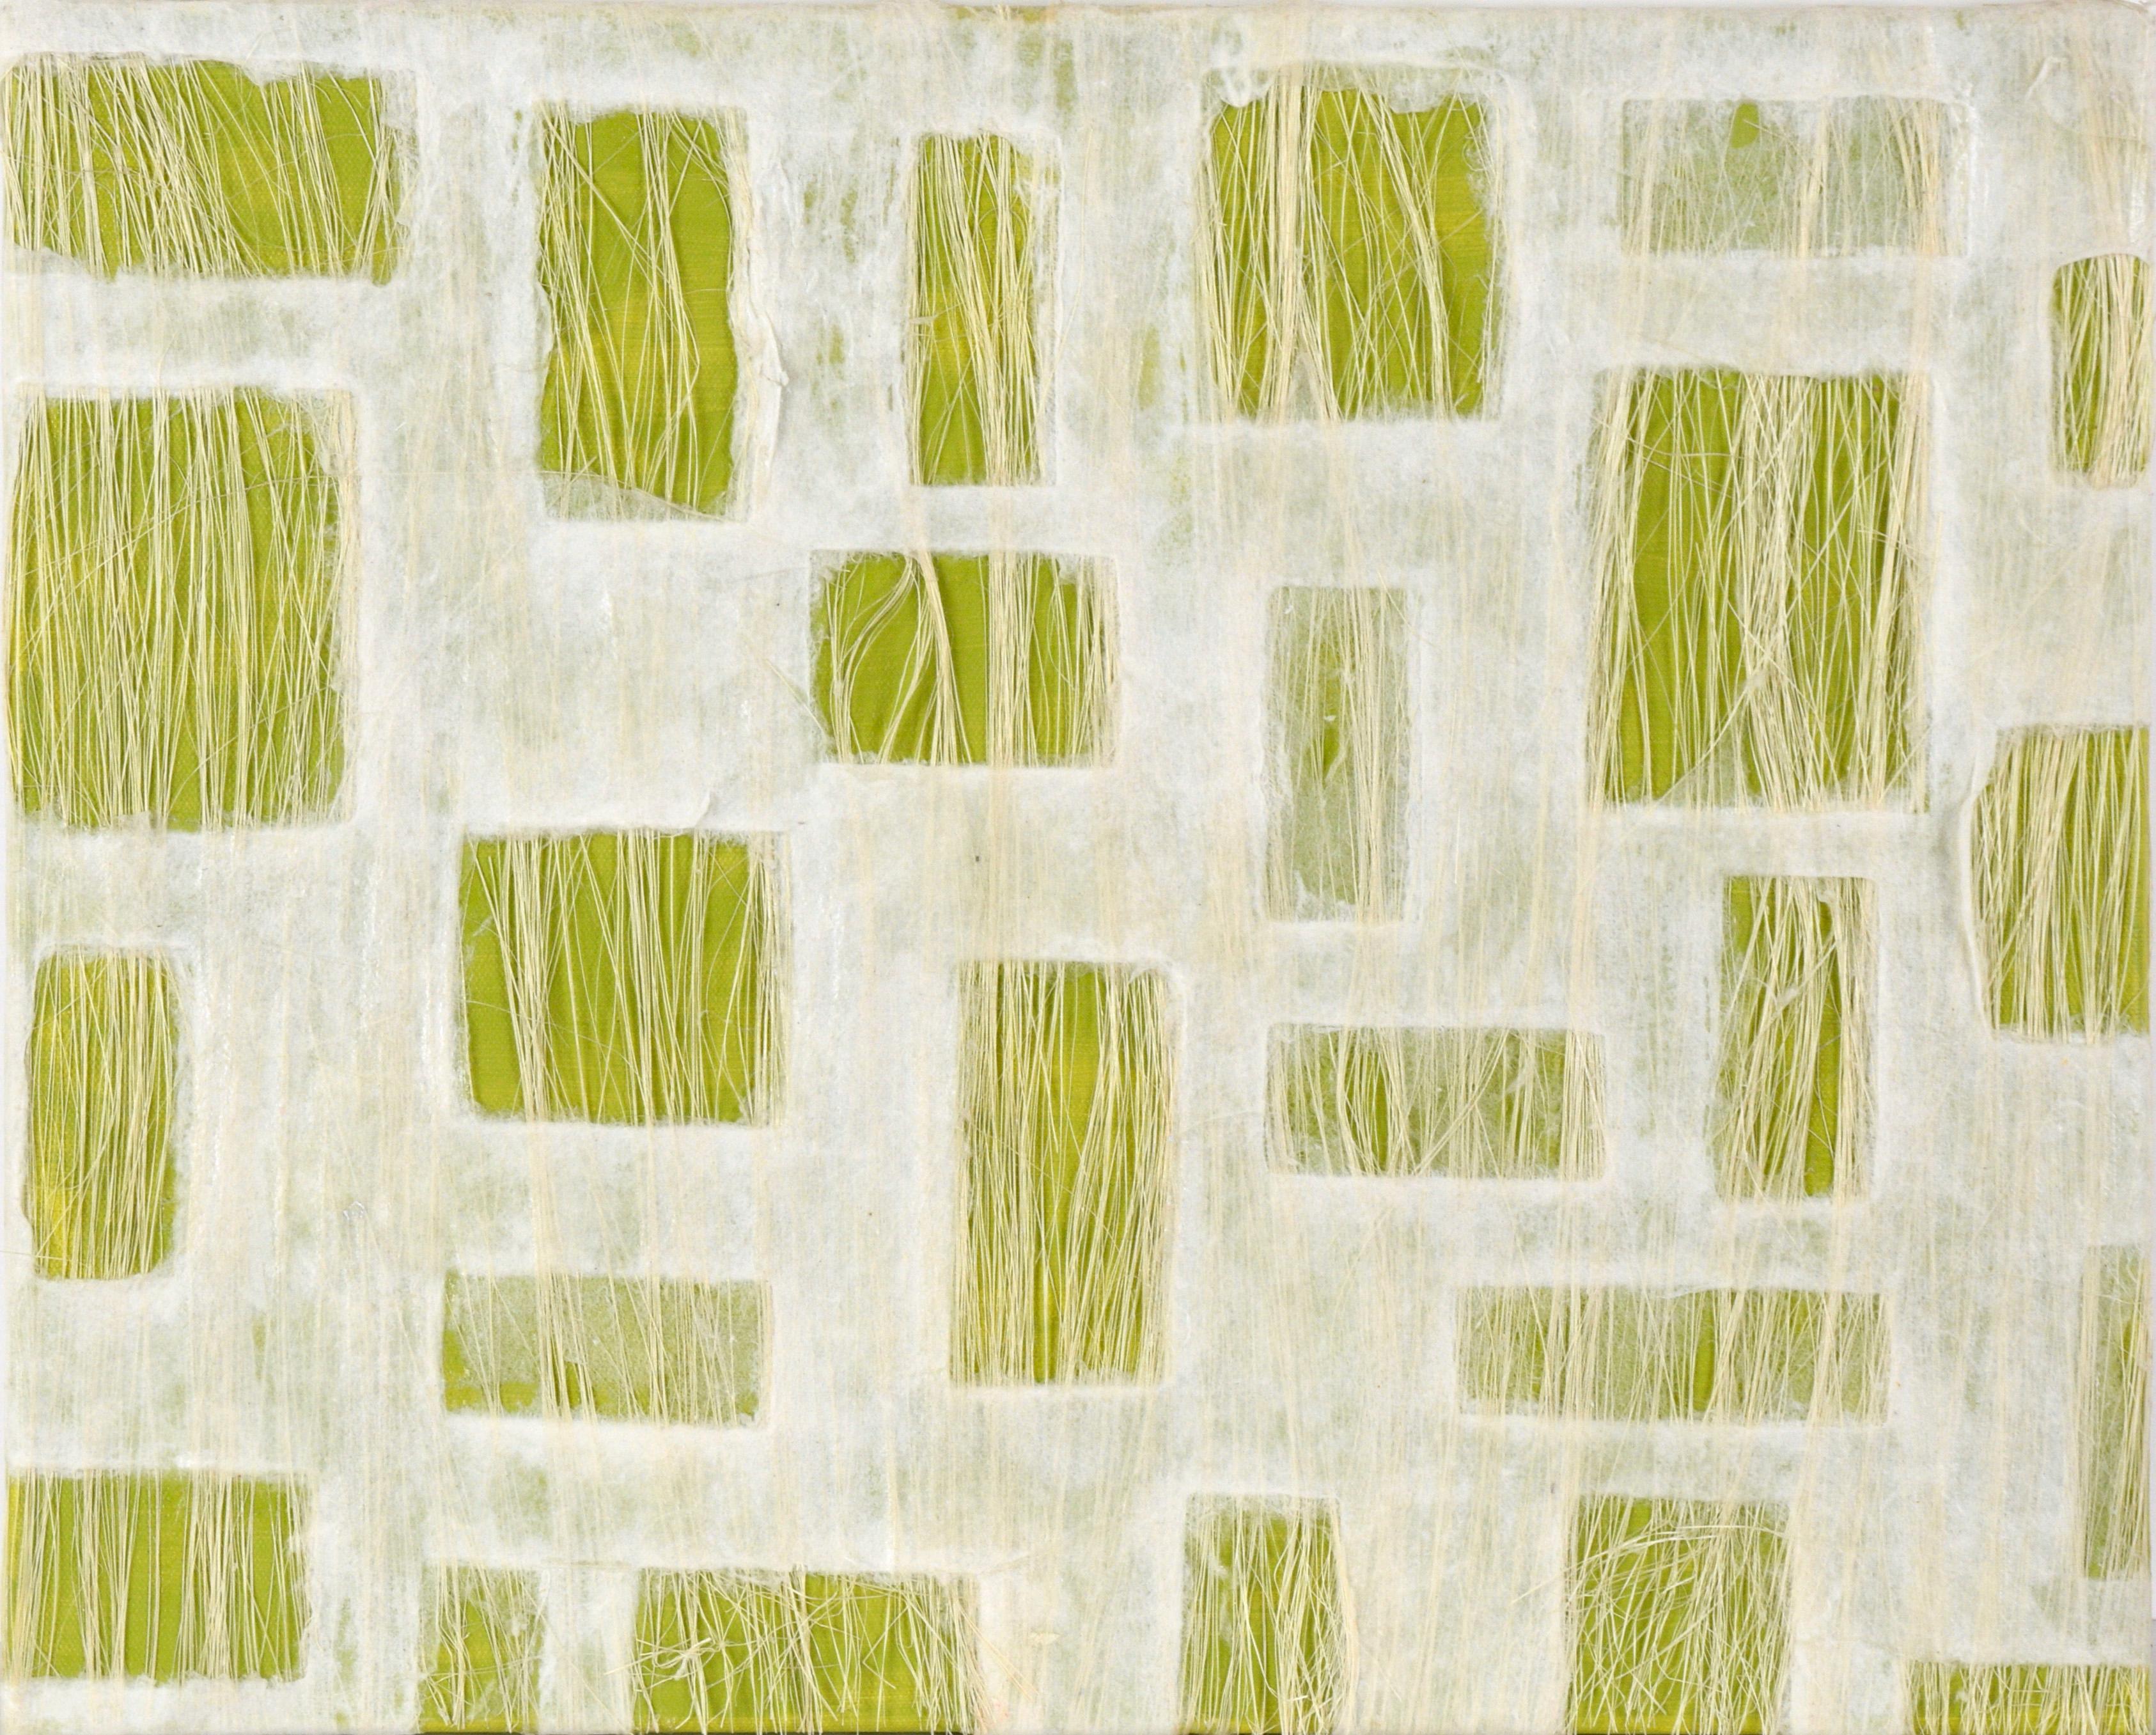 Unknown Abstract Painting - Abstract Geometric Composition with Paper, Fibers, and Acrylic on Canvas (Green)